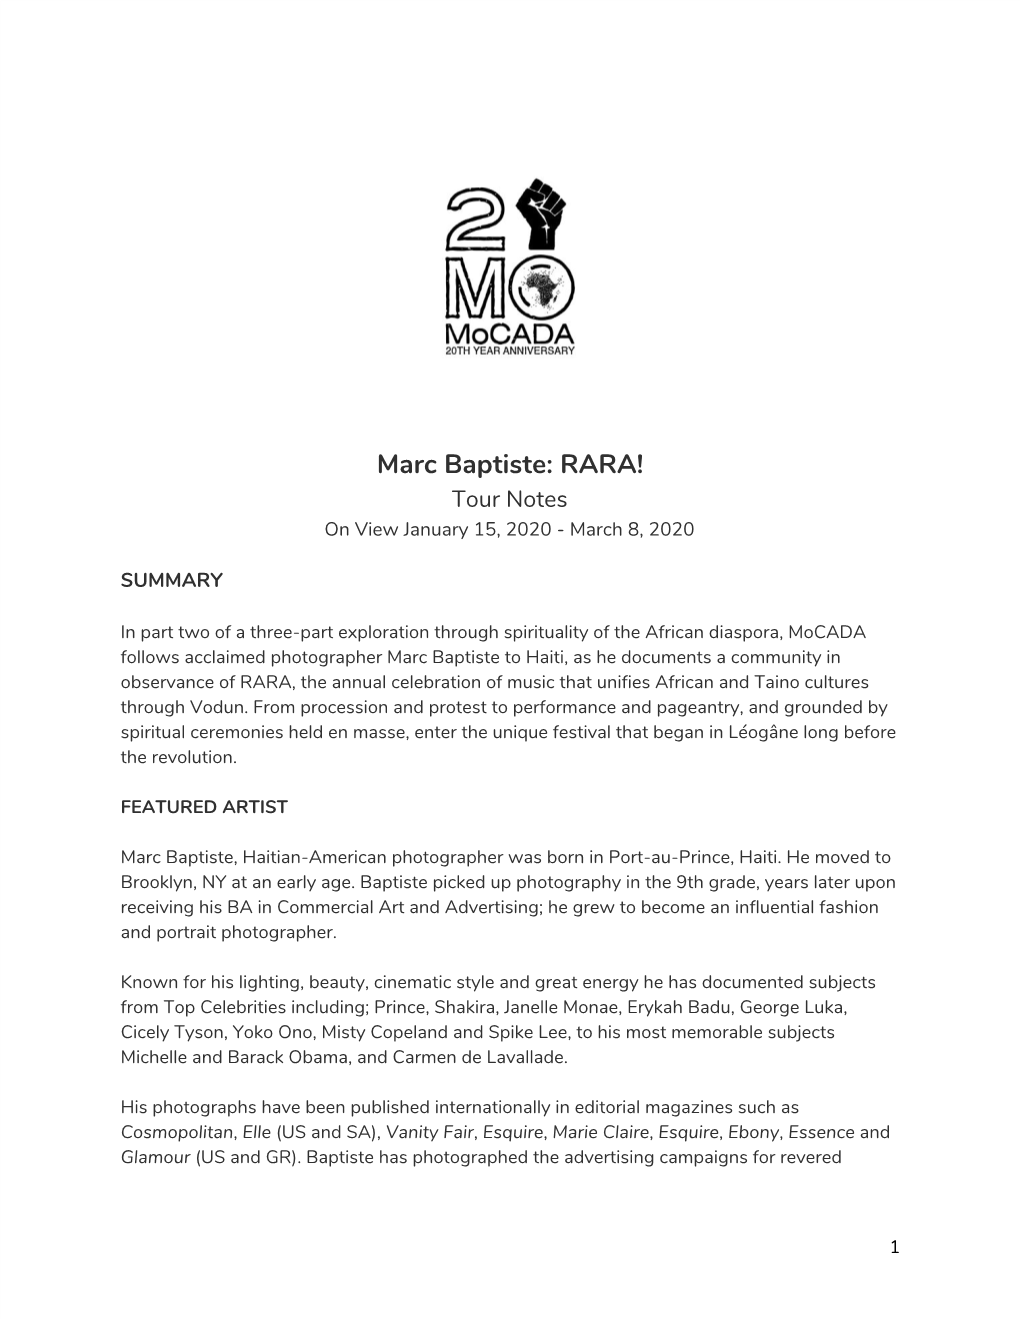 Marc Baptiste: RARA! Tour Notes on View January 15, 2020 - March 8, 2020